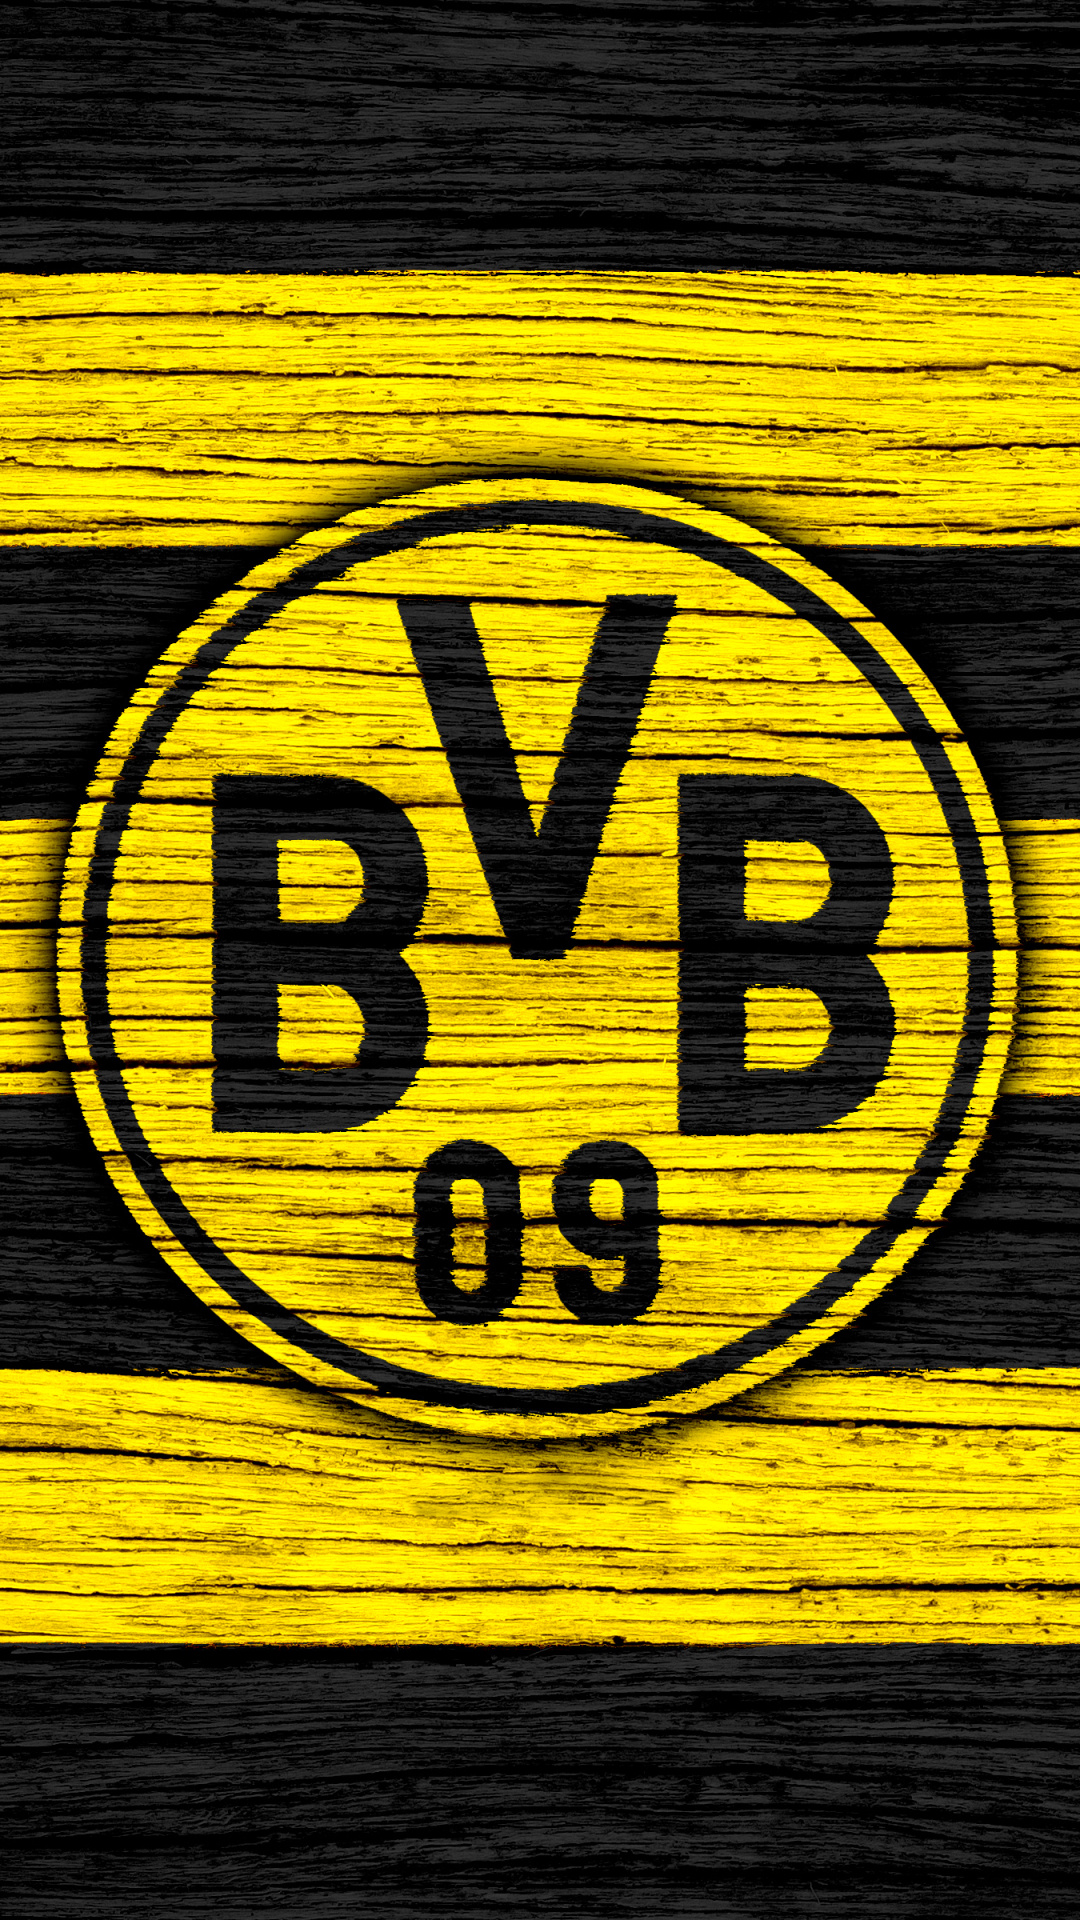 Borussia Dortmund: Regarded as the hub of talented players as over the years they have produced a string of players who later developed into world-class athletes. 1080x1920 Full HD Wallpaper.